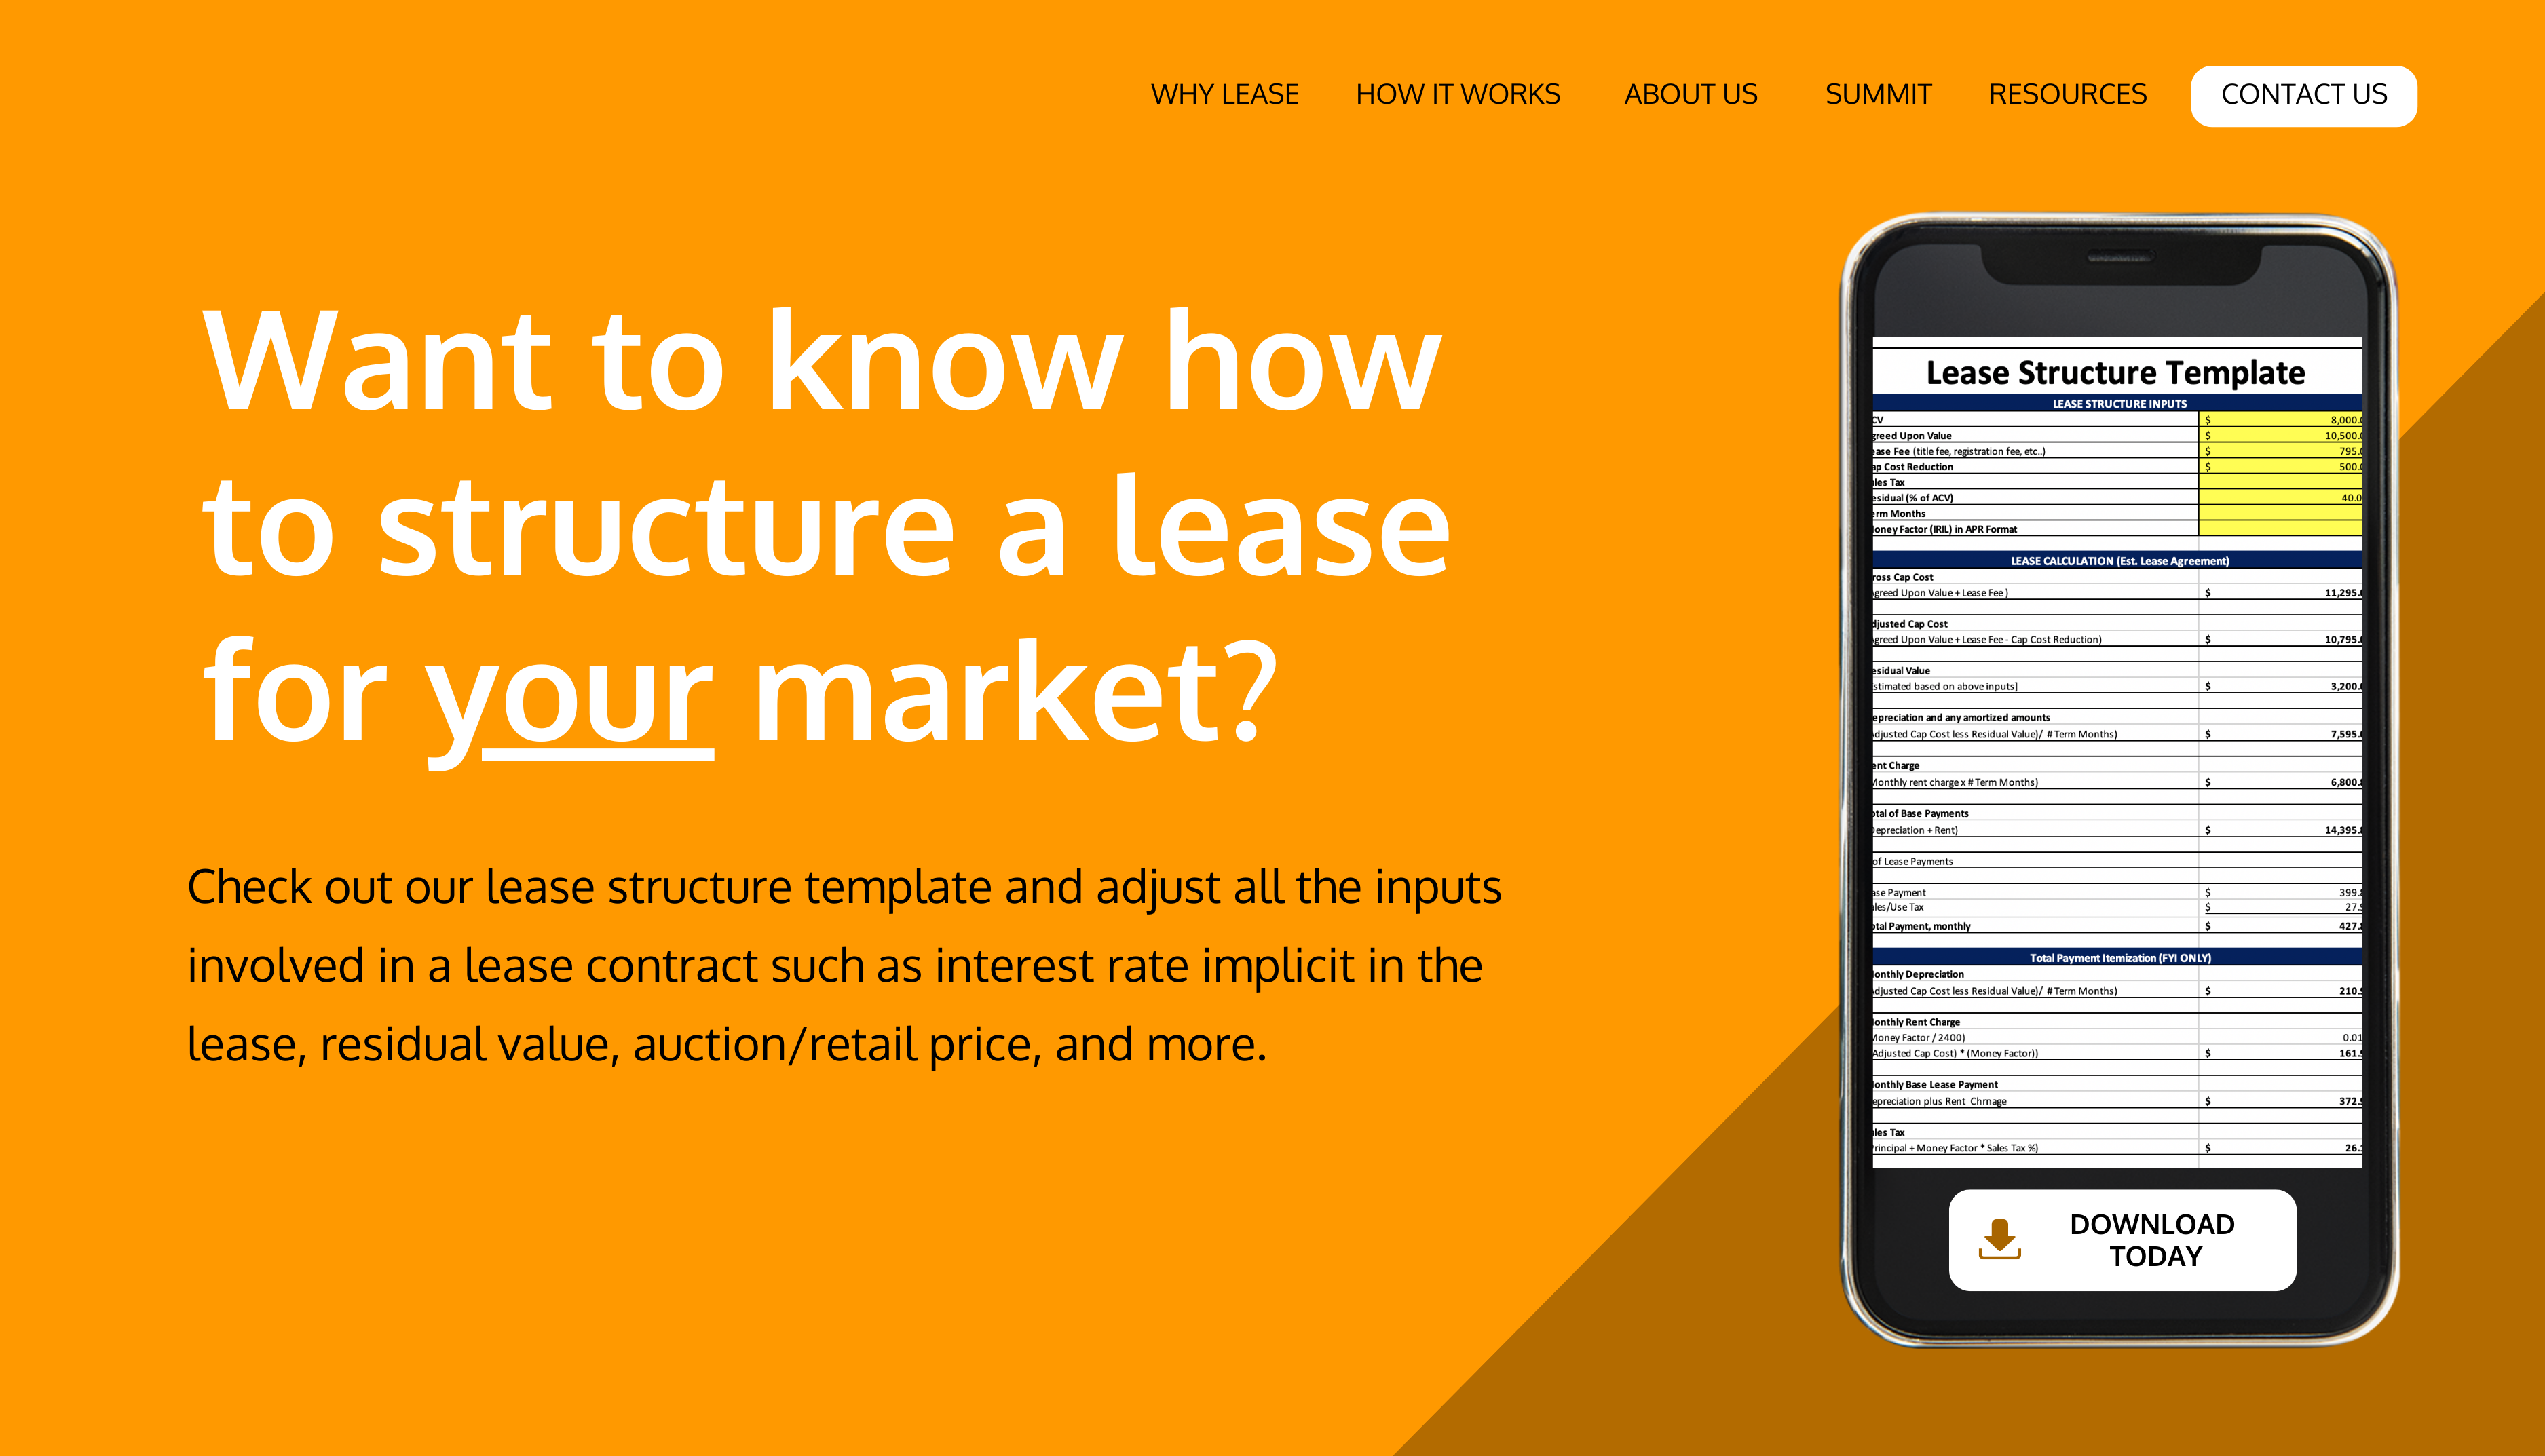 LEASE STRUCTURE TEMPLATE